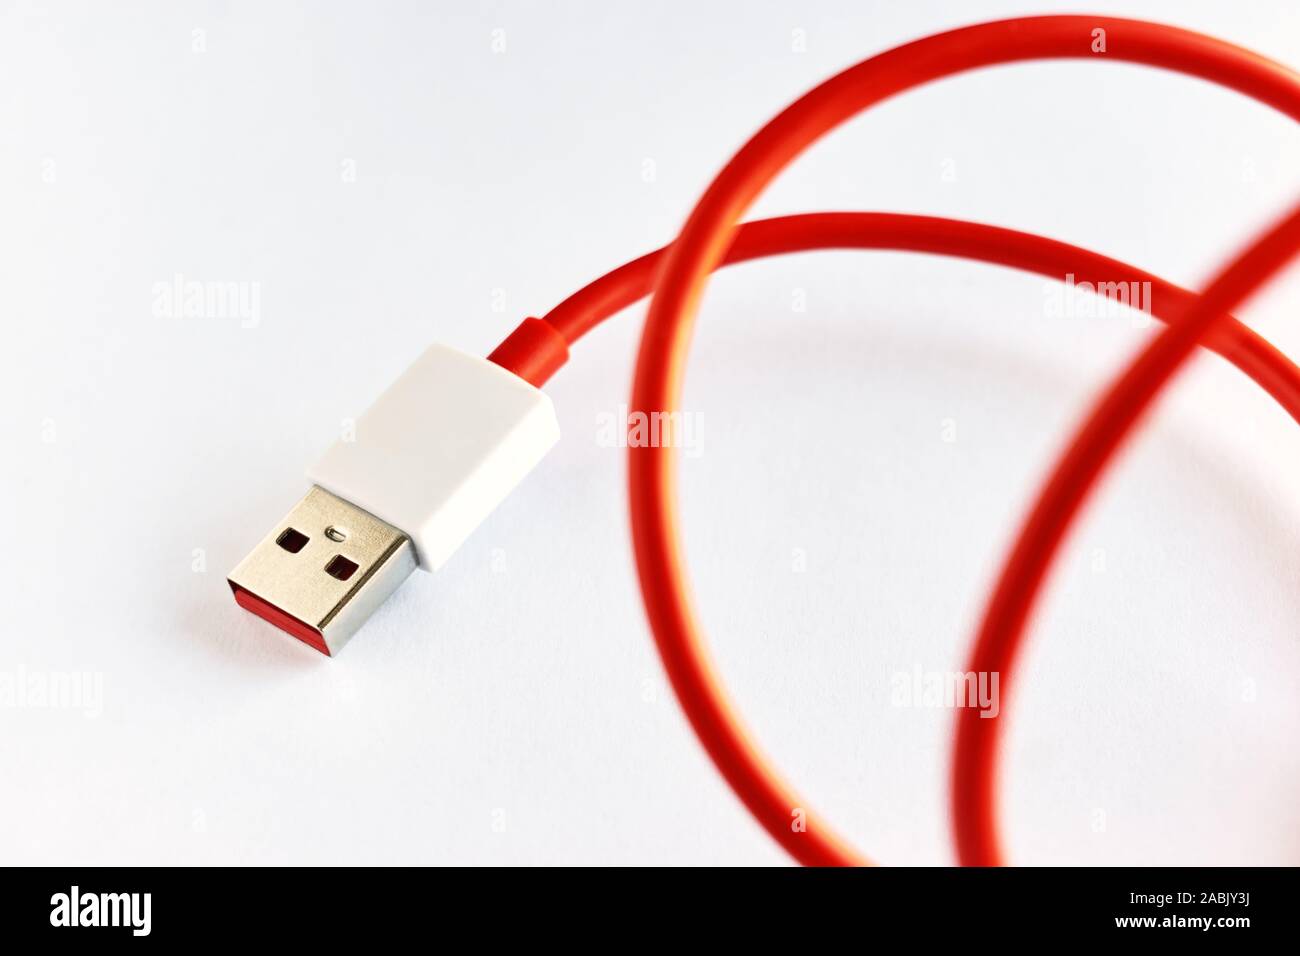 Rolled up cable -Fotos und -Bildmaterial in hoher Auflösung – Alamy